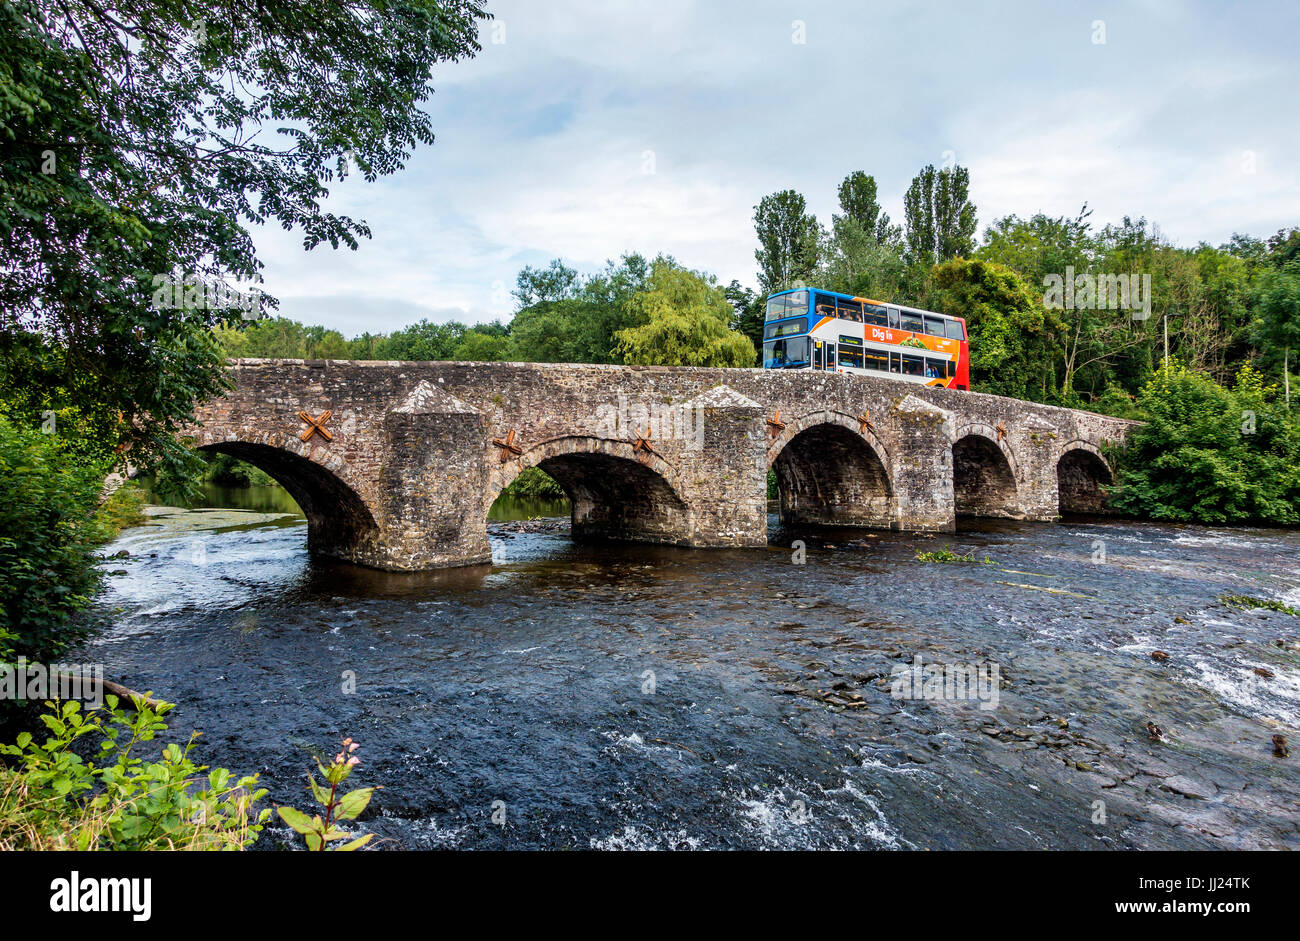 Medieval Bridge with Double Decker Crossing Bickleigh Devon. A five arch stone bridge crossing the river Exe below Tiverton, built in 1809 and listed  Stock Photo